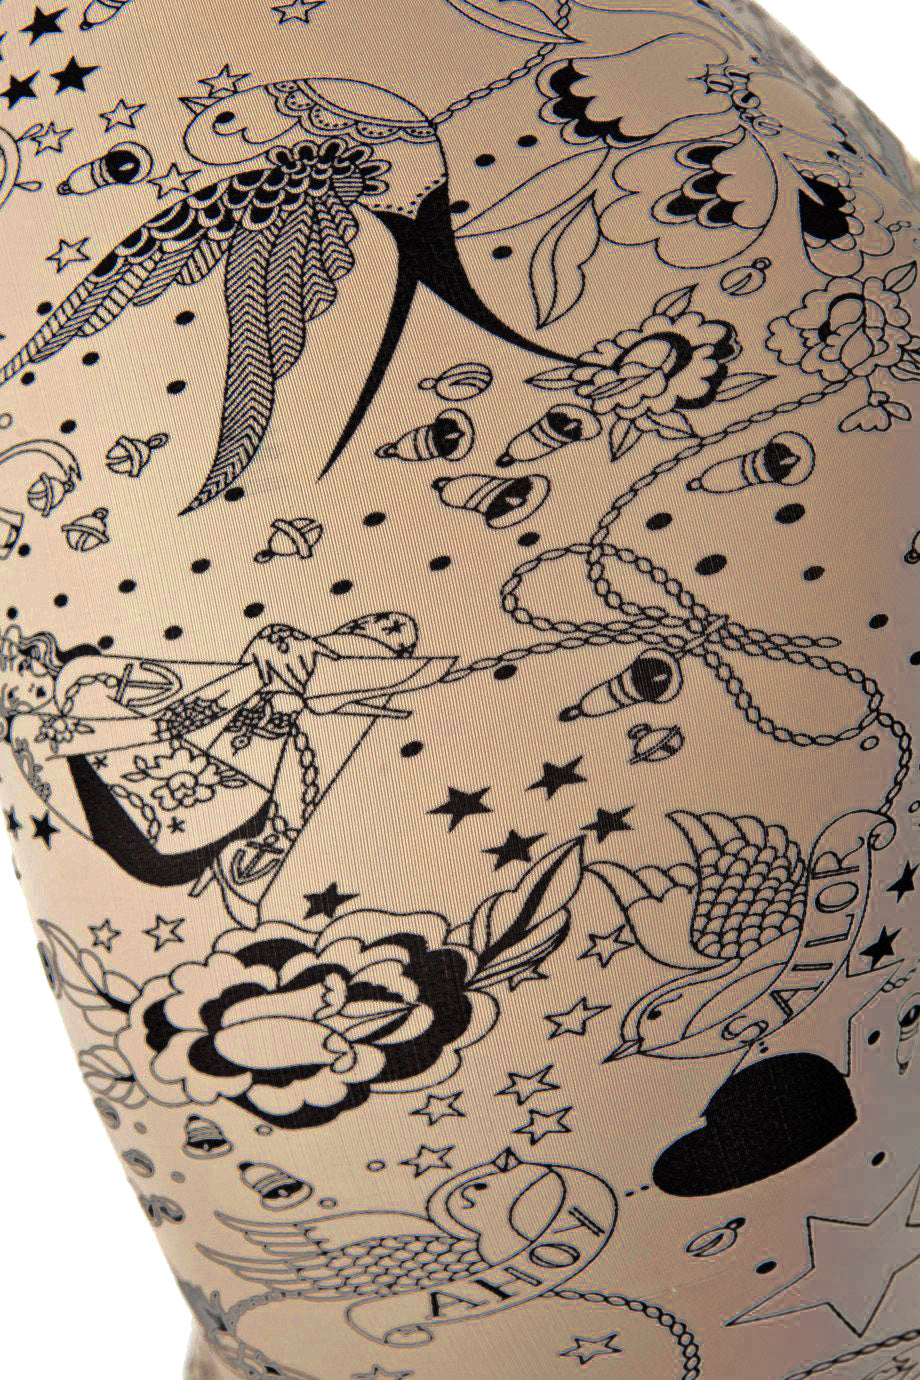 AHOY Tights with Tattoo design